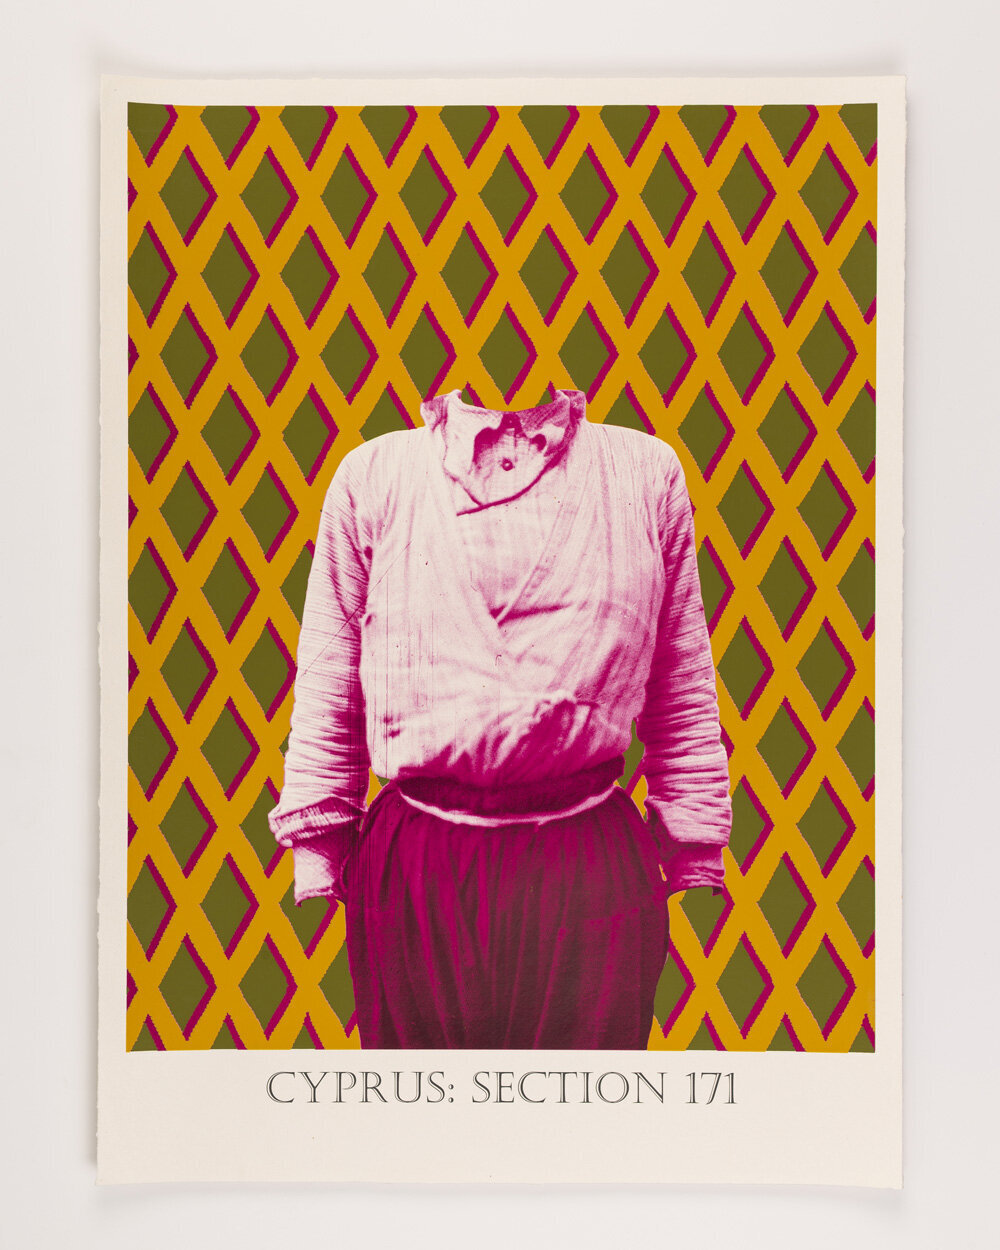 Cyprus: Section 171